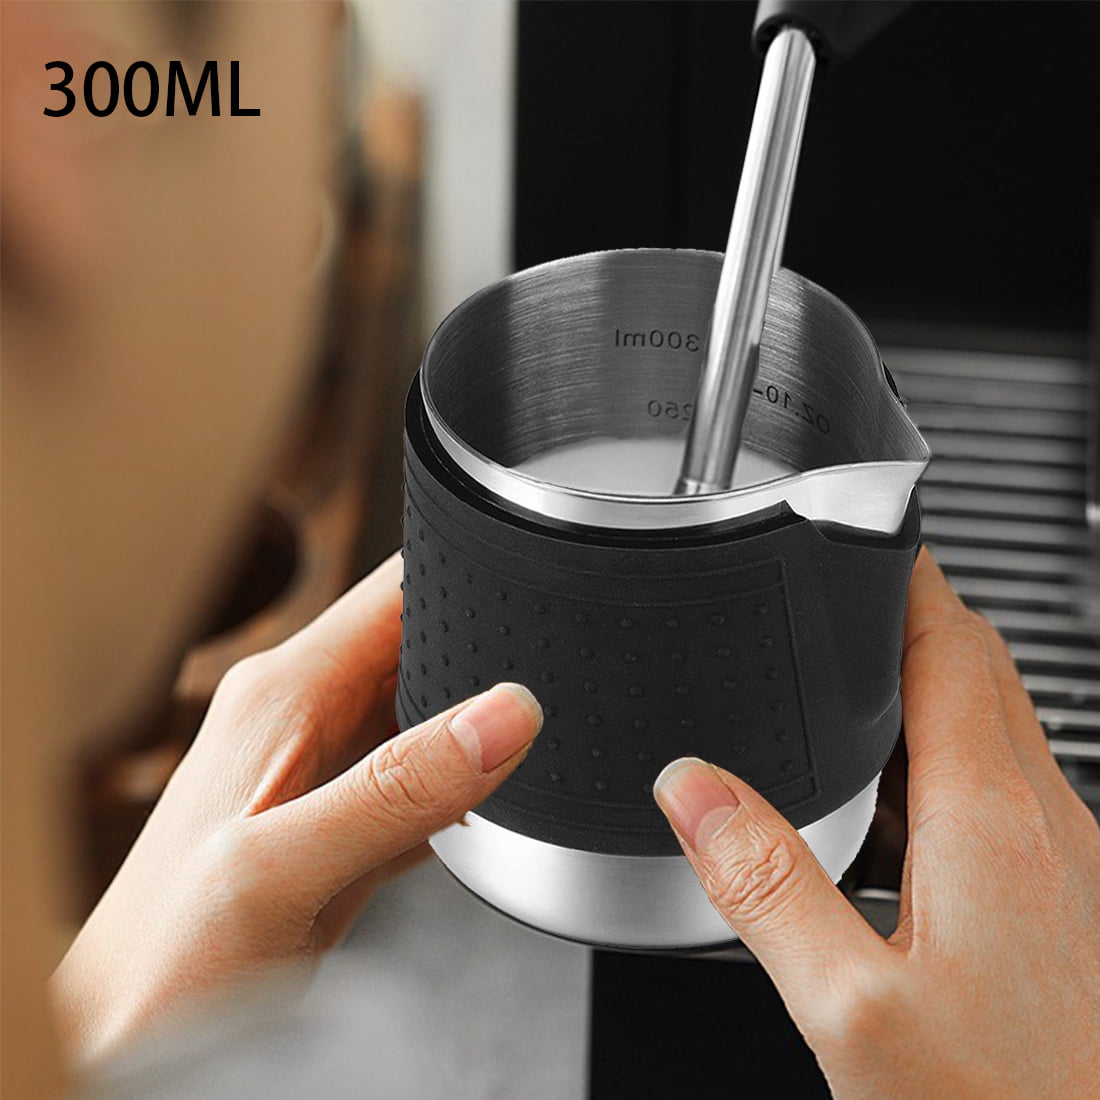 300ML Stainless Steel Milk Frothing Pitcher